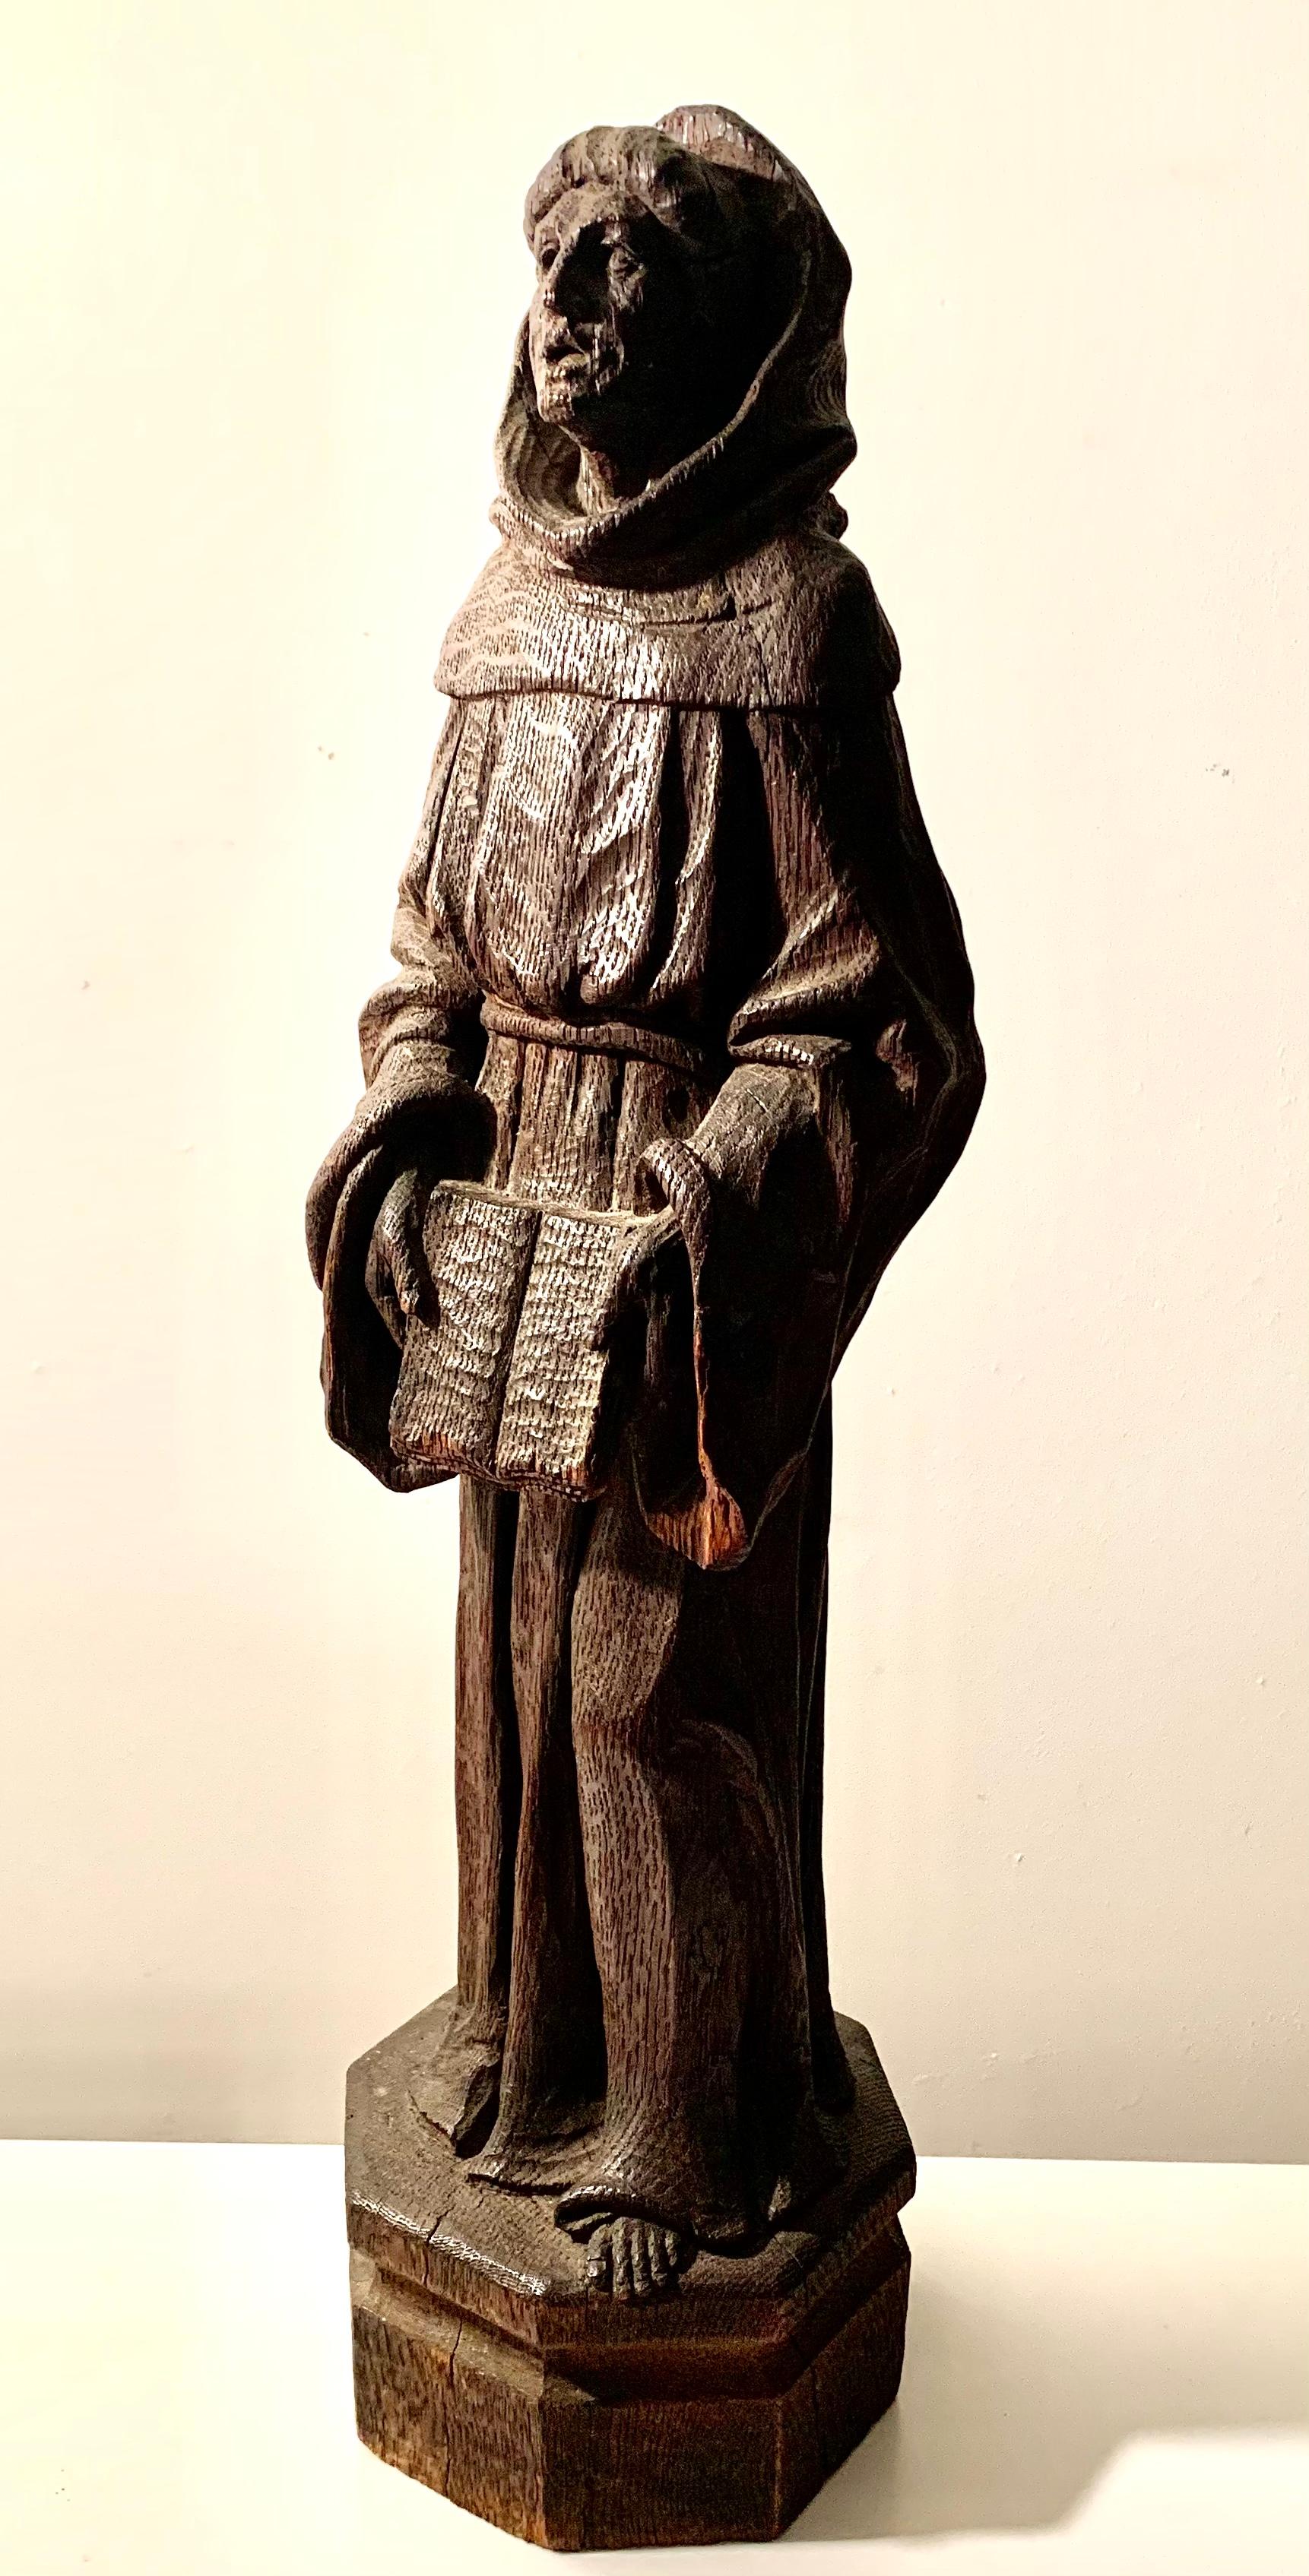 Antique Large Carved Oak Figure of Saint Anthony of Padua, 18th-19th Century For Sale 2